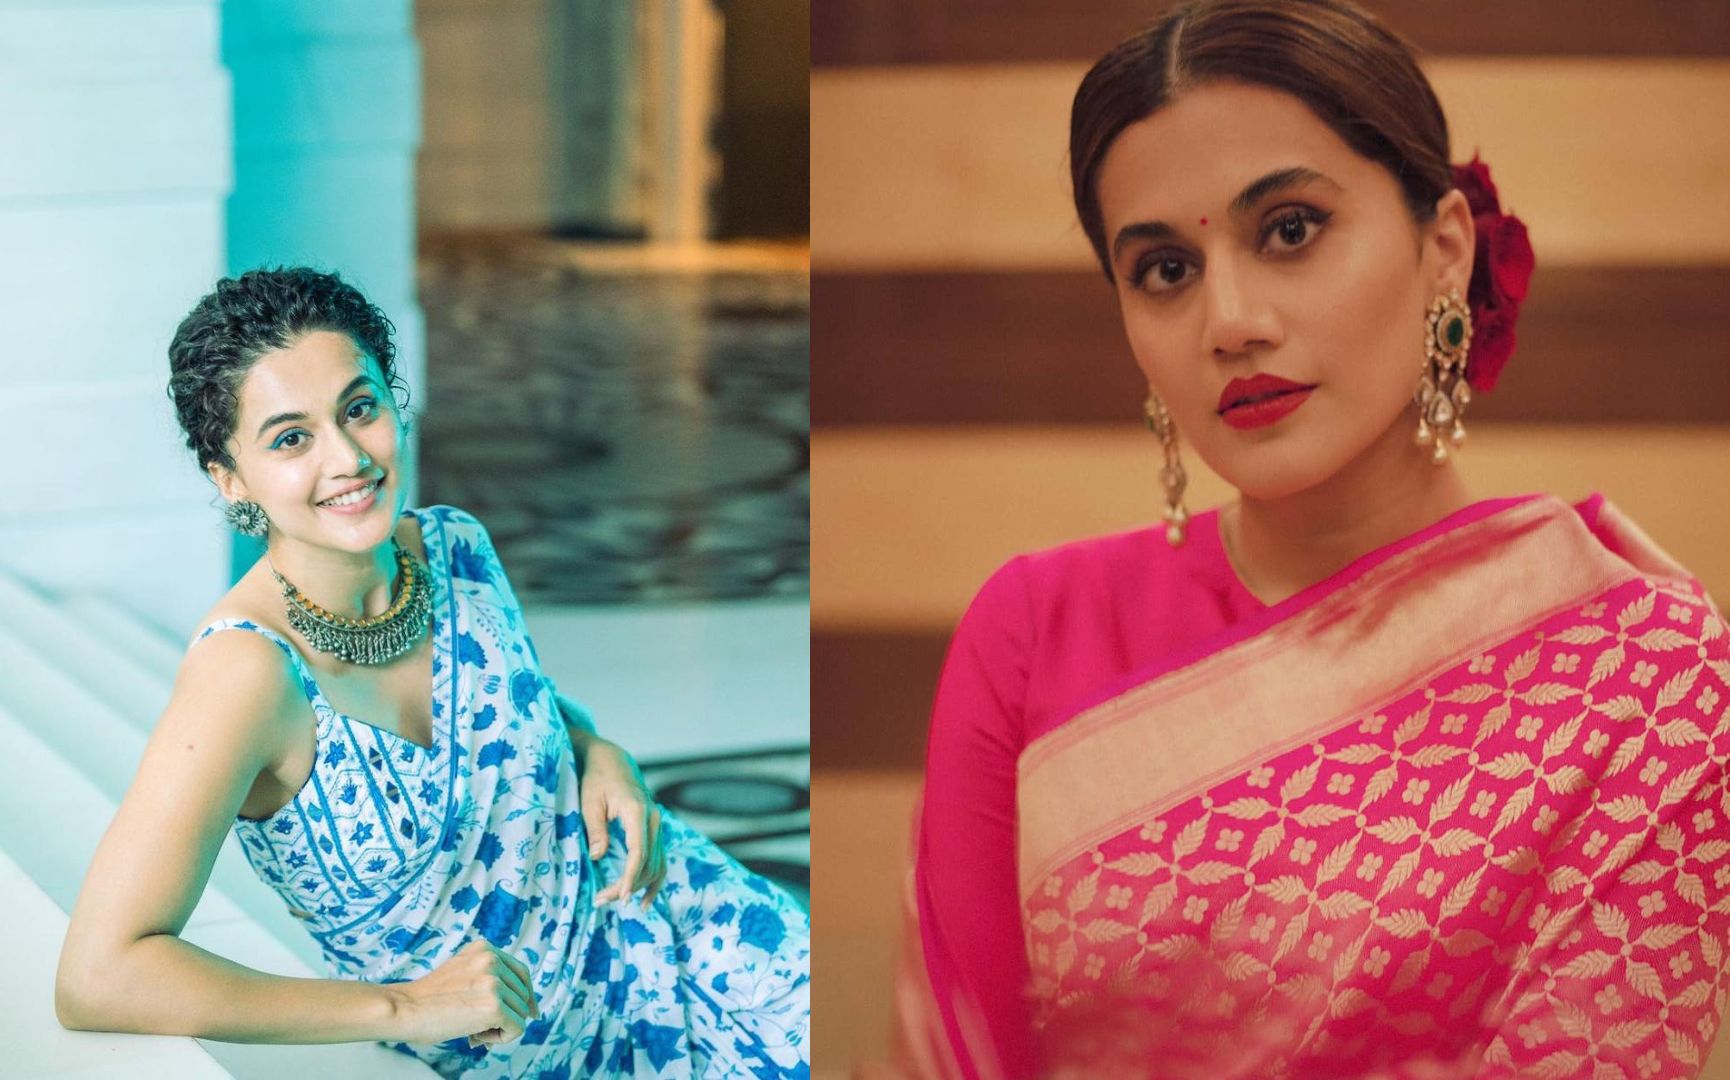 Taapsee’s ethereal jewelry